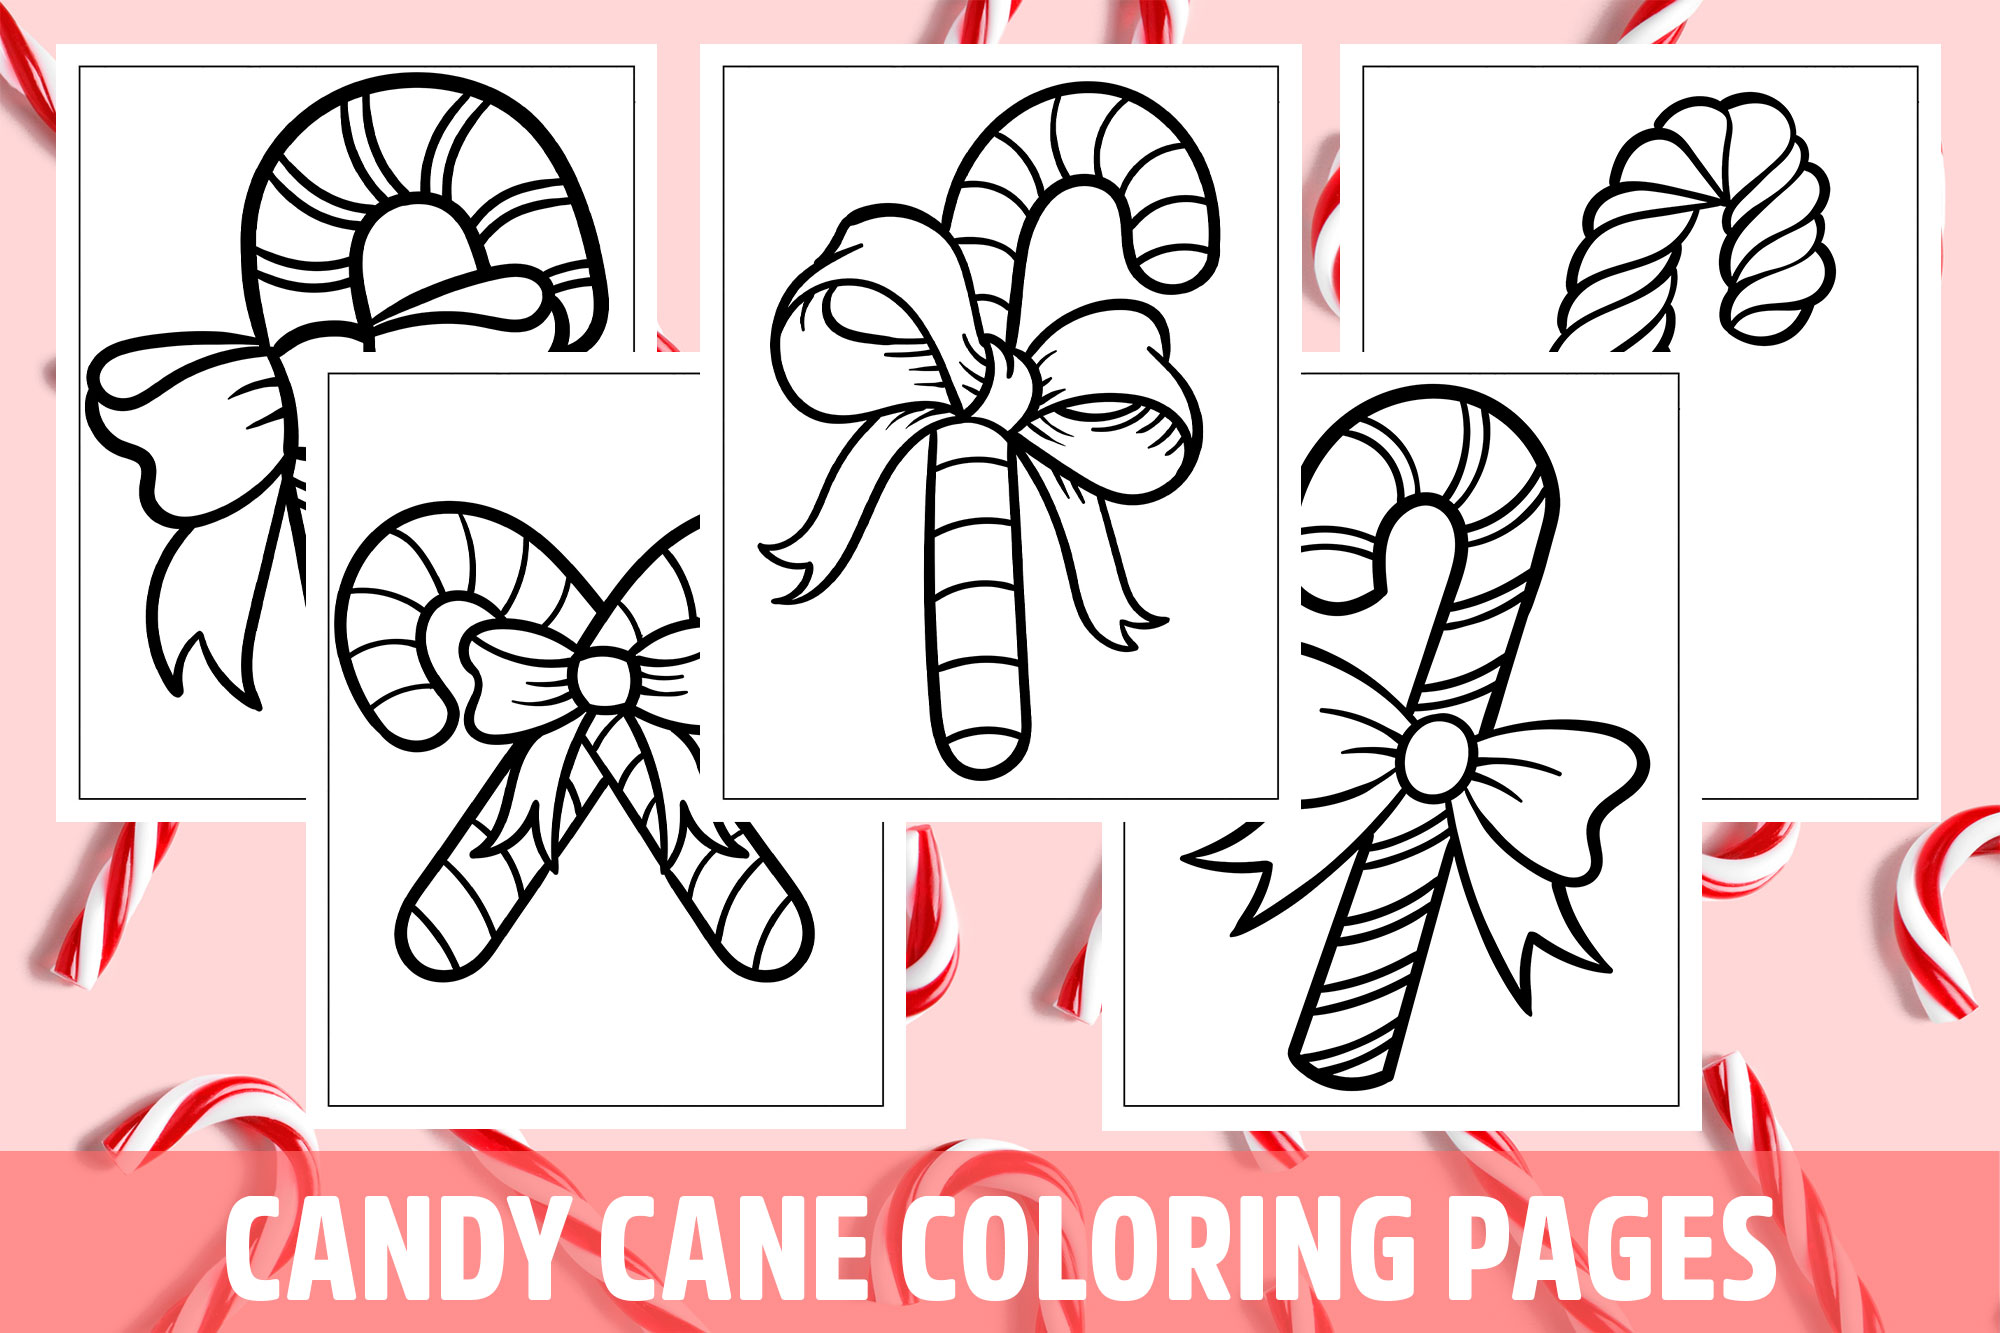 Candy cane coloring pages for kids girls boys teens birthday school activity made by teachers